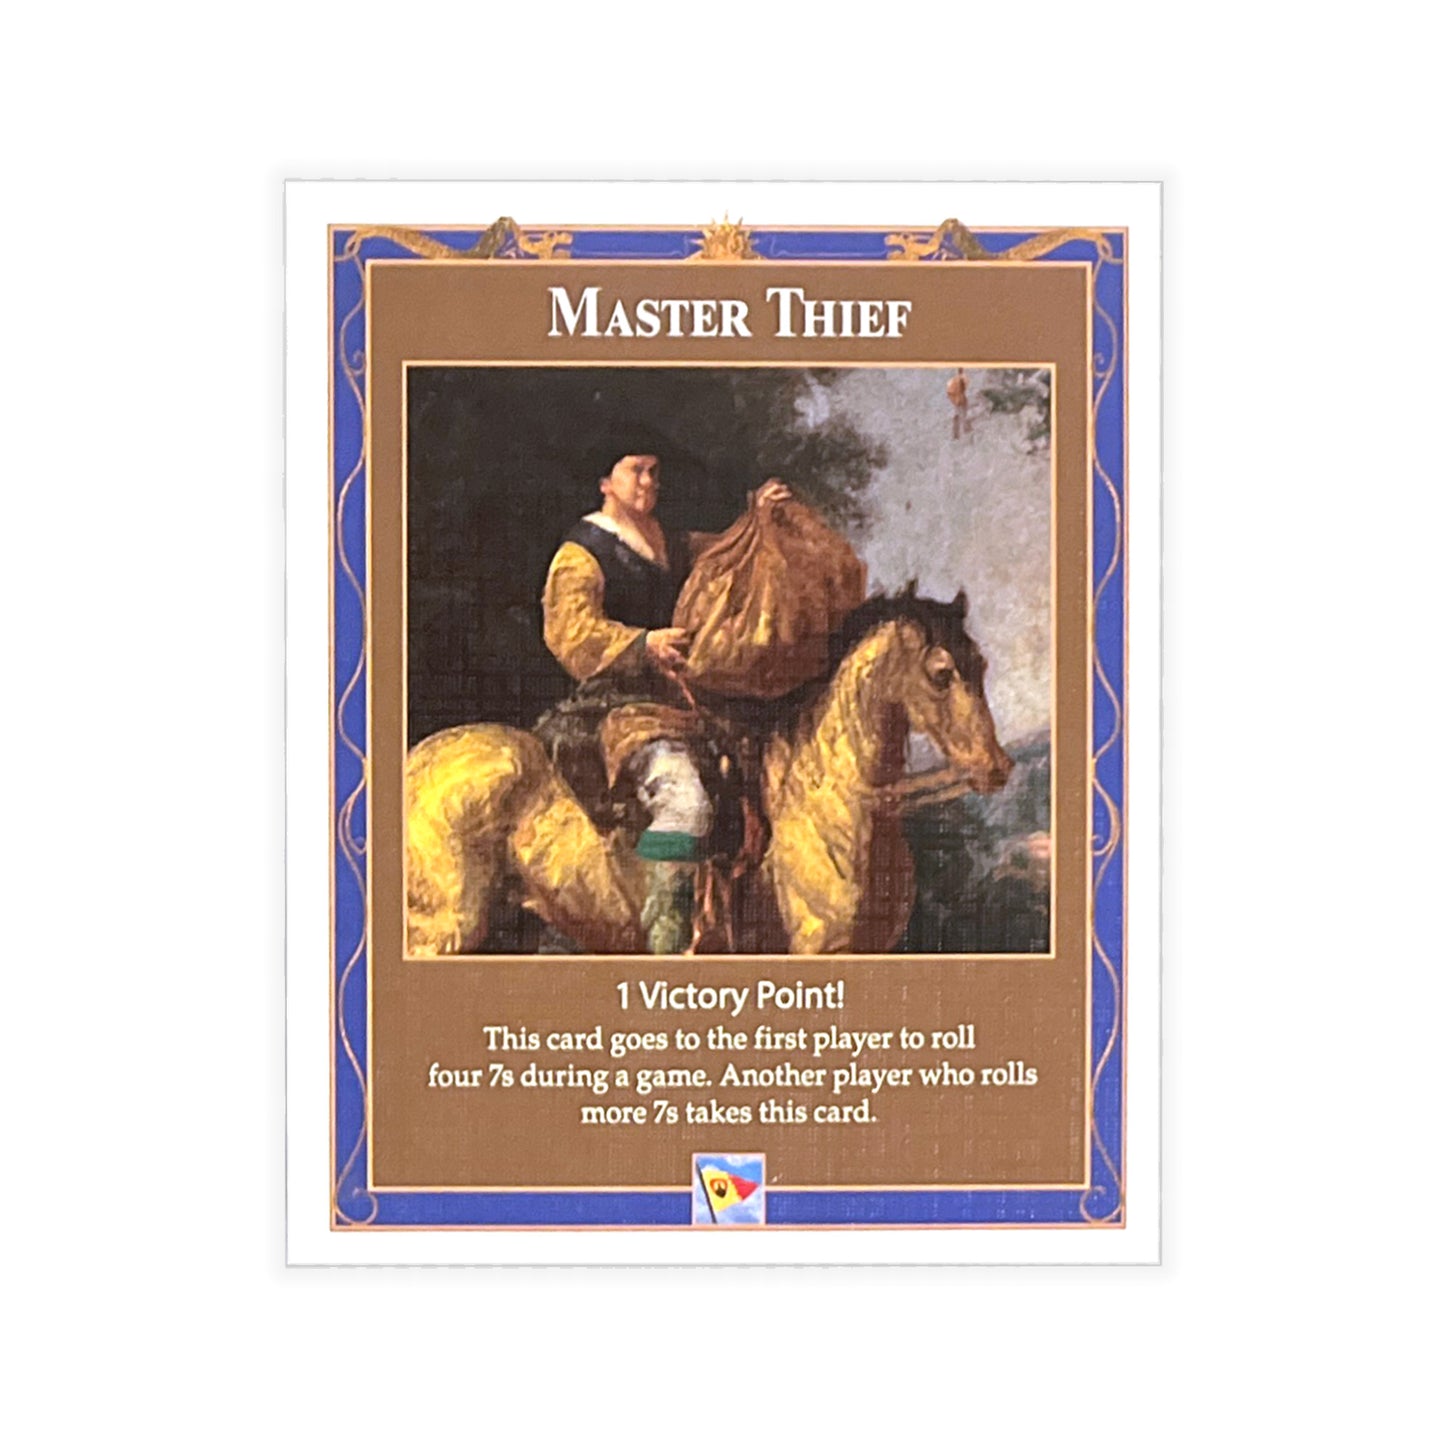 Master Thief Card compatible with Catan's Settlers of Catan (4th Edition), Seafarers, and Catan Expansions, 4th Edition